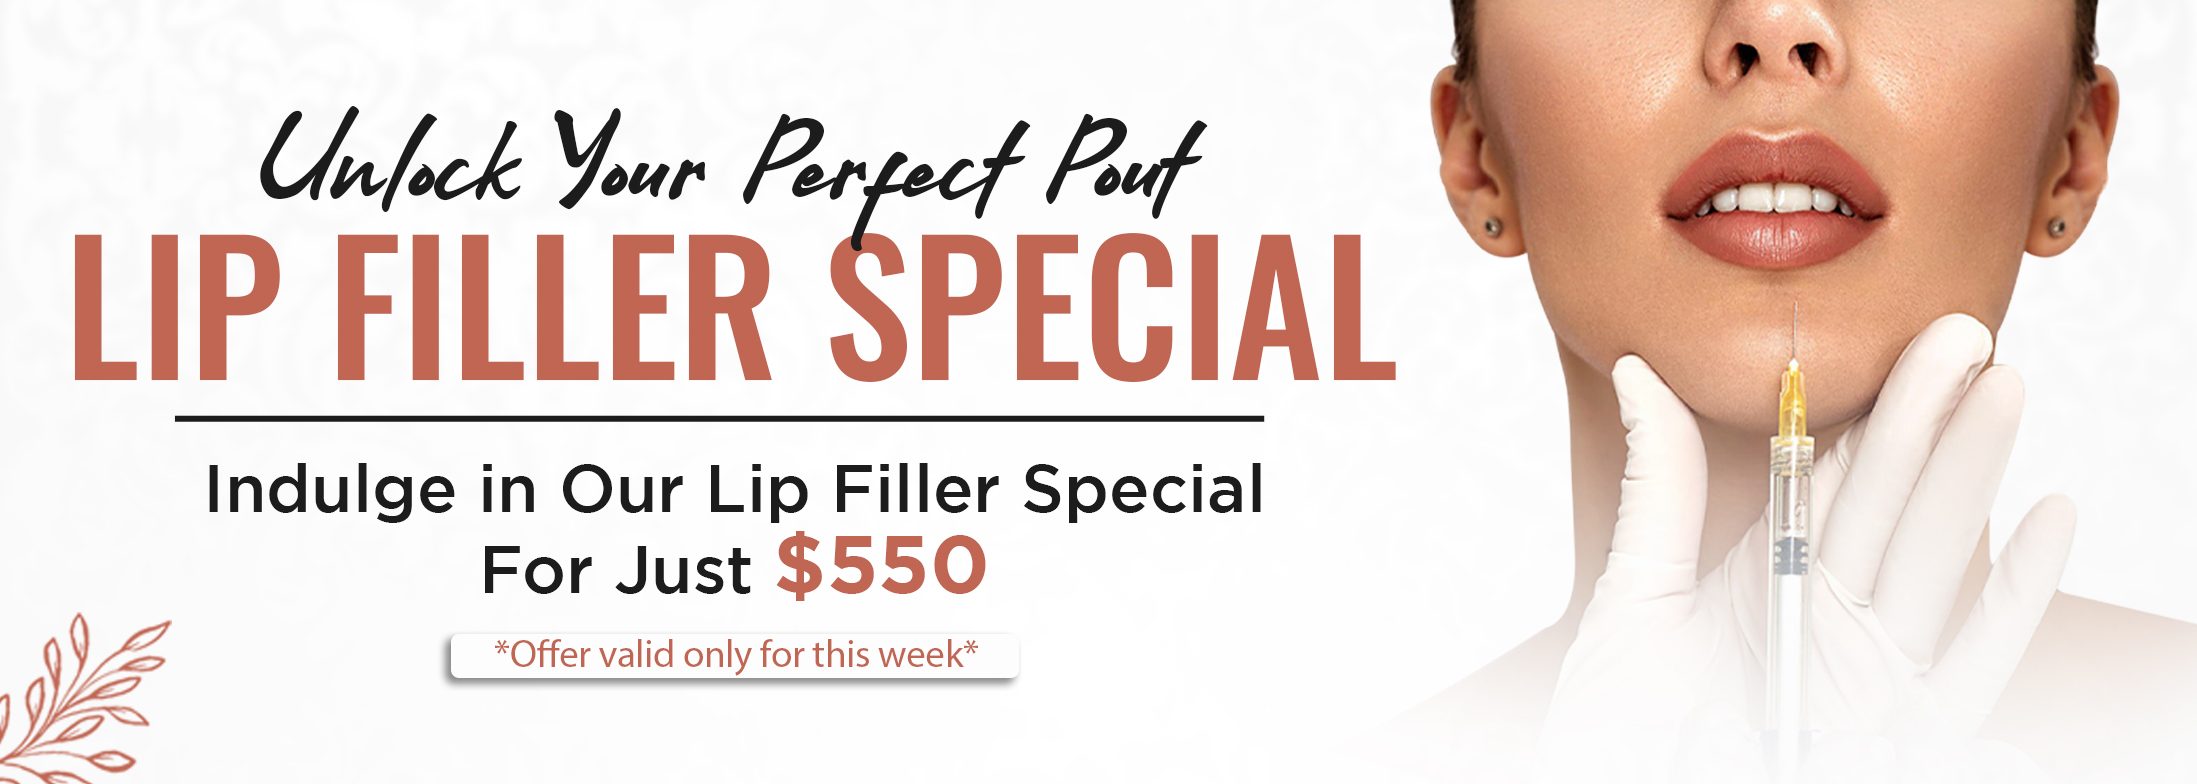 Embrace fuller, more luscious lips with our exclusive Lip Filler Special! For just $550, enhance your natural beauty and boost your confidence. Hurry, this offer is valid for this week only.